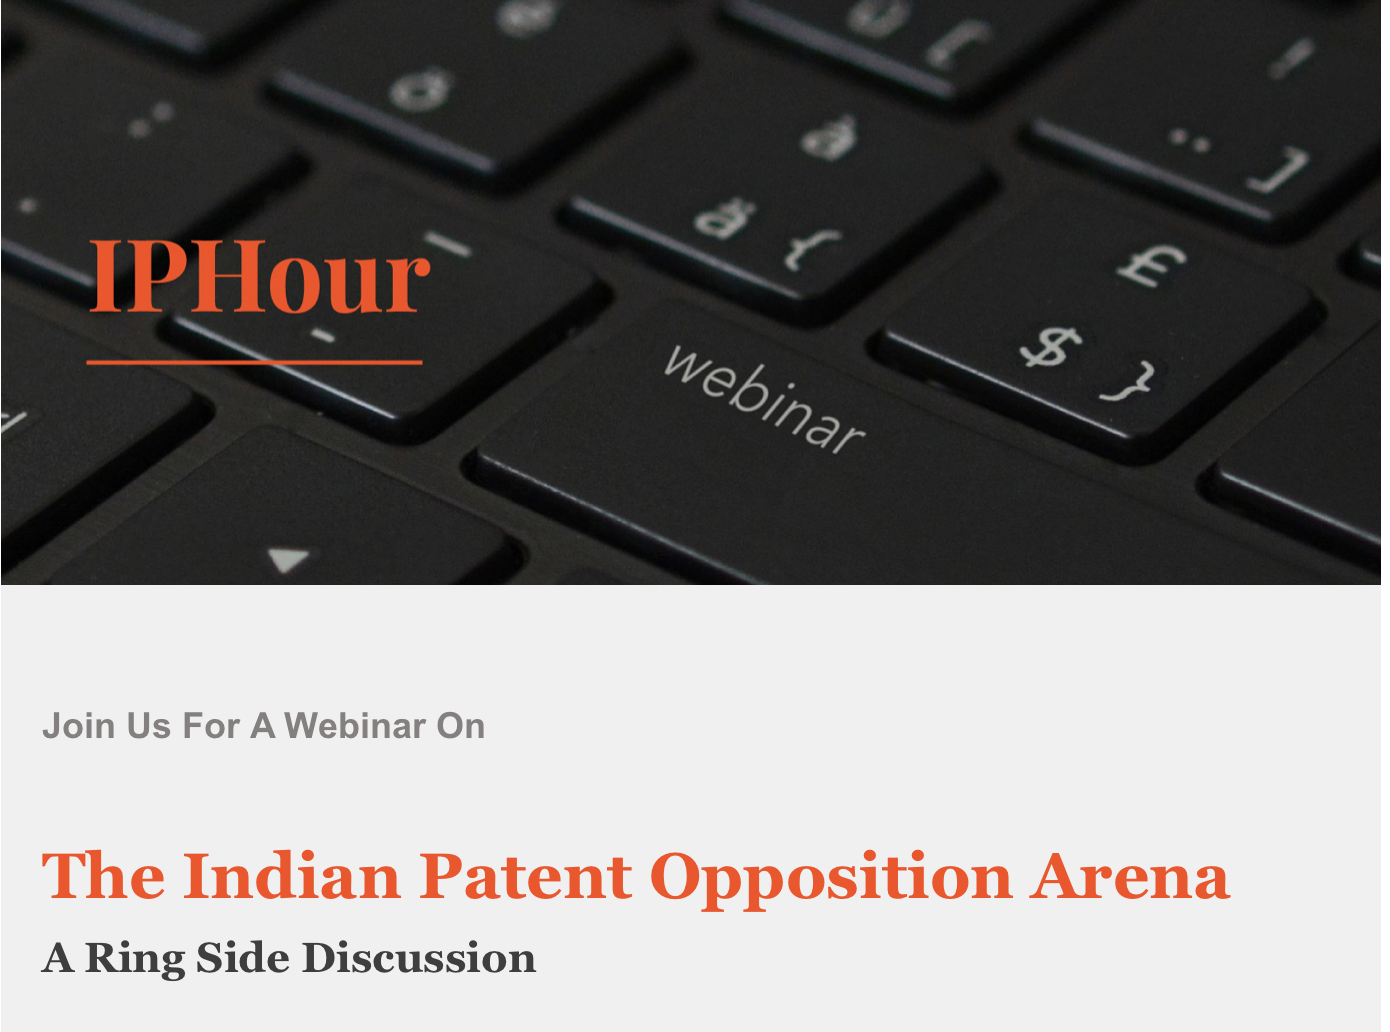 IPHour: The Indian Patent Opposition Arena